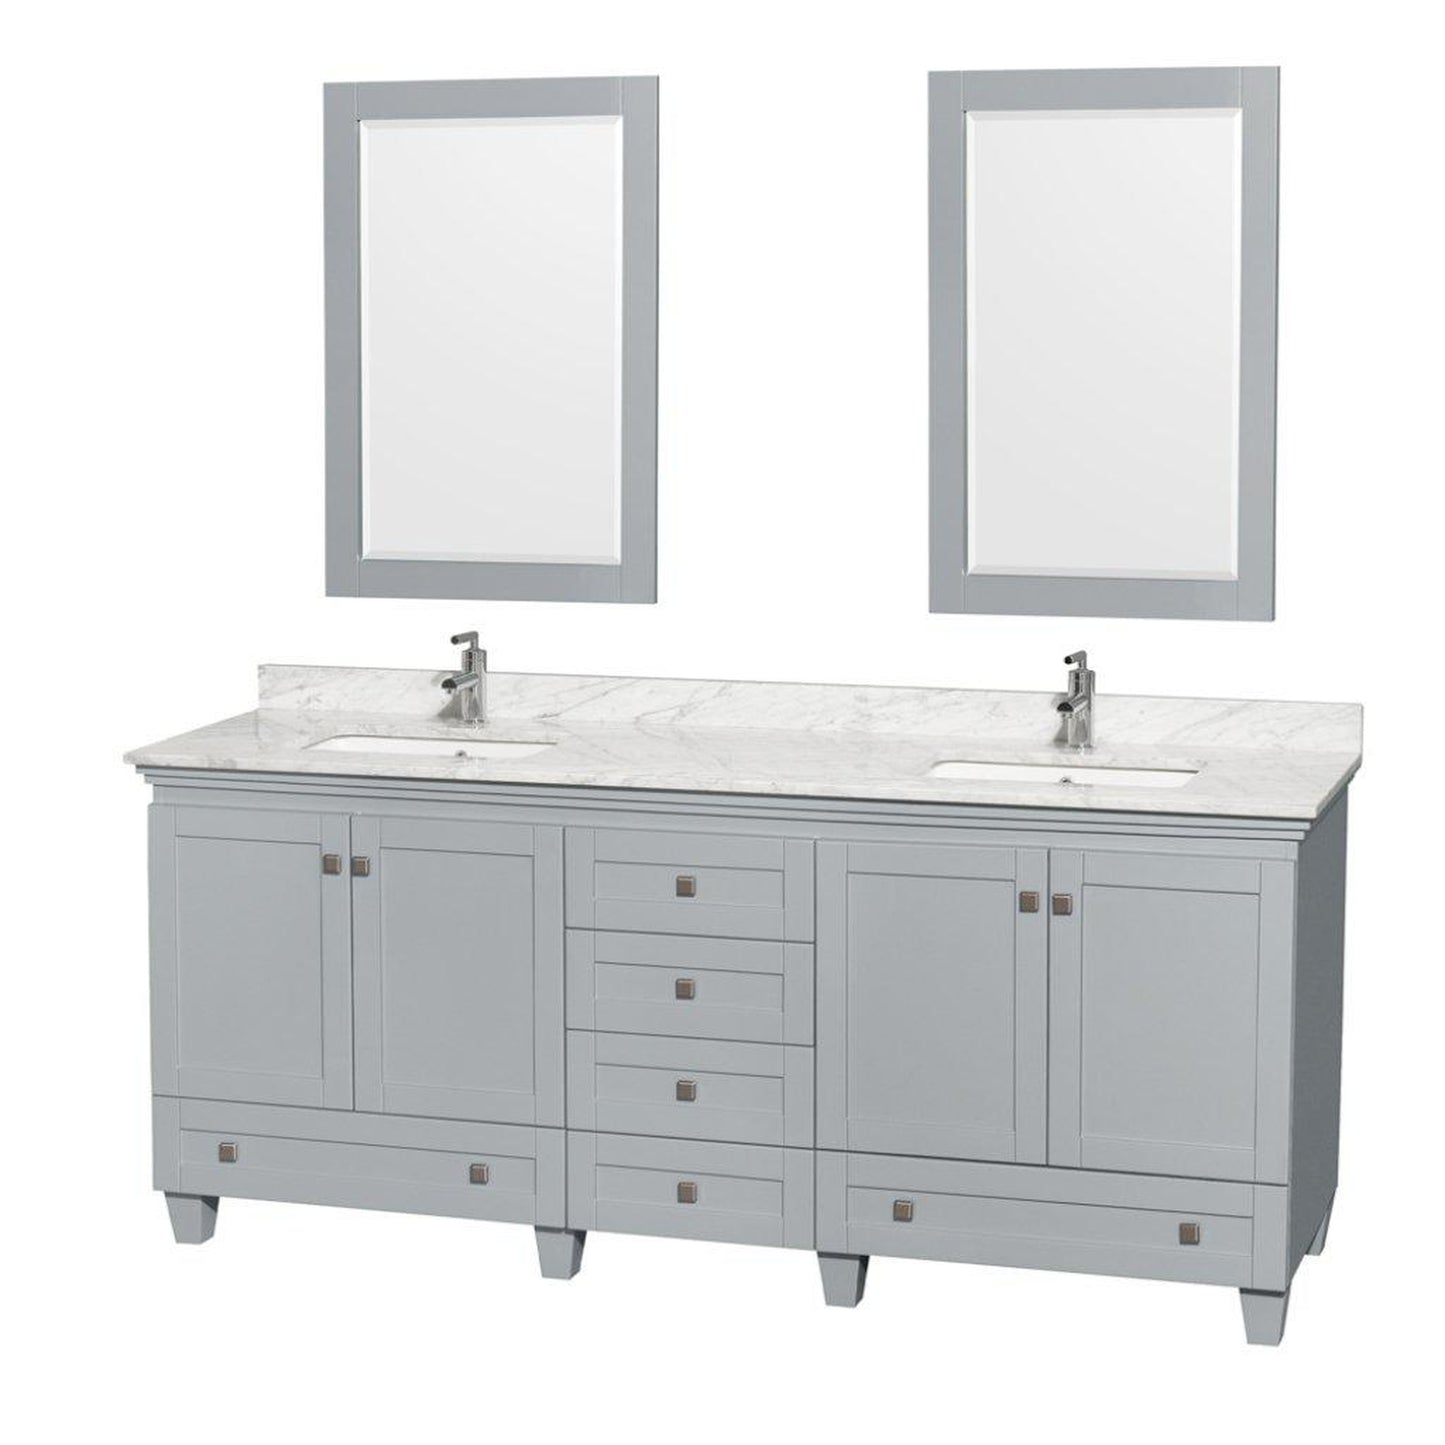 Wyndham Collection Acclaim 80" Double Bathroom Oyster Gray Vanity With White Carrara Marble Countertop And Undermount Square Sinks And 2 Set Of 24" Mirror